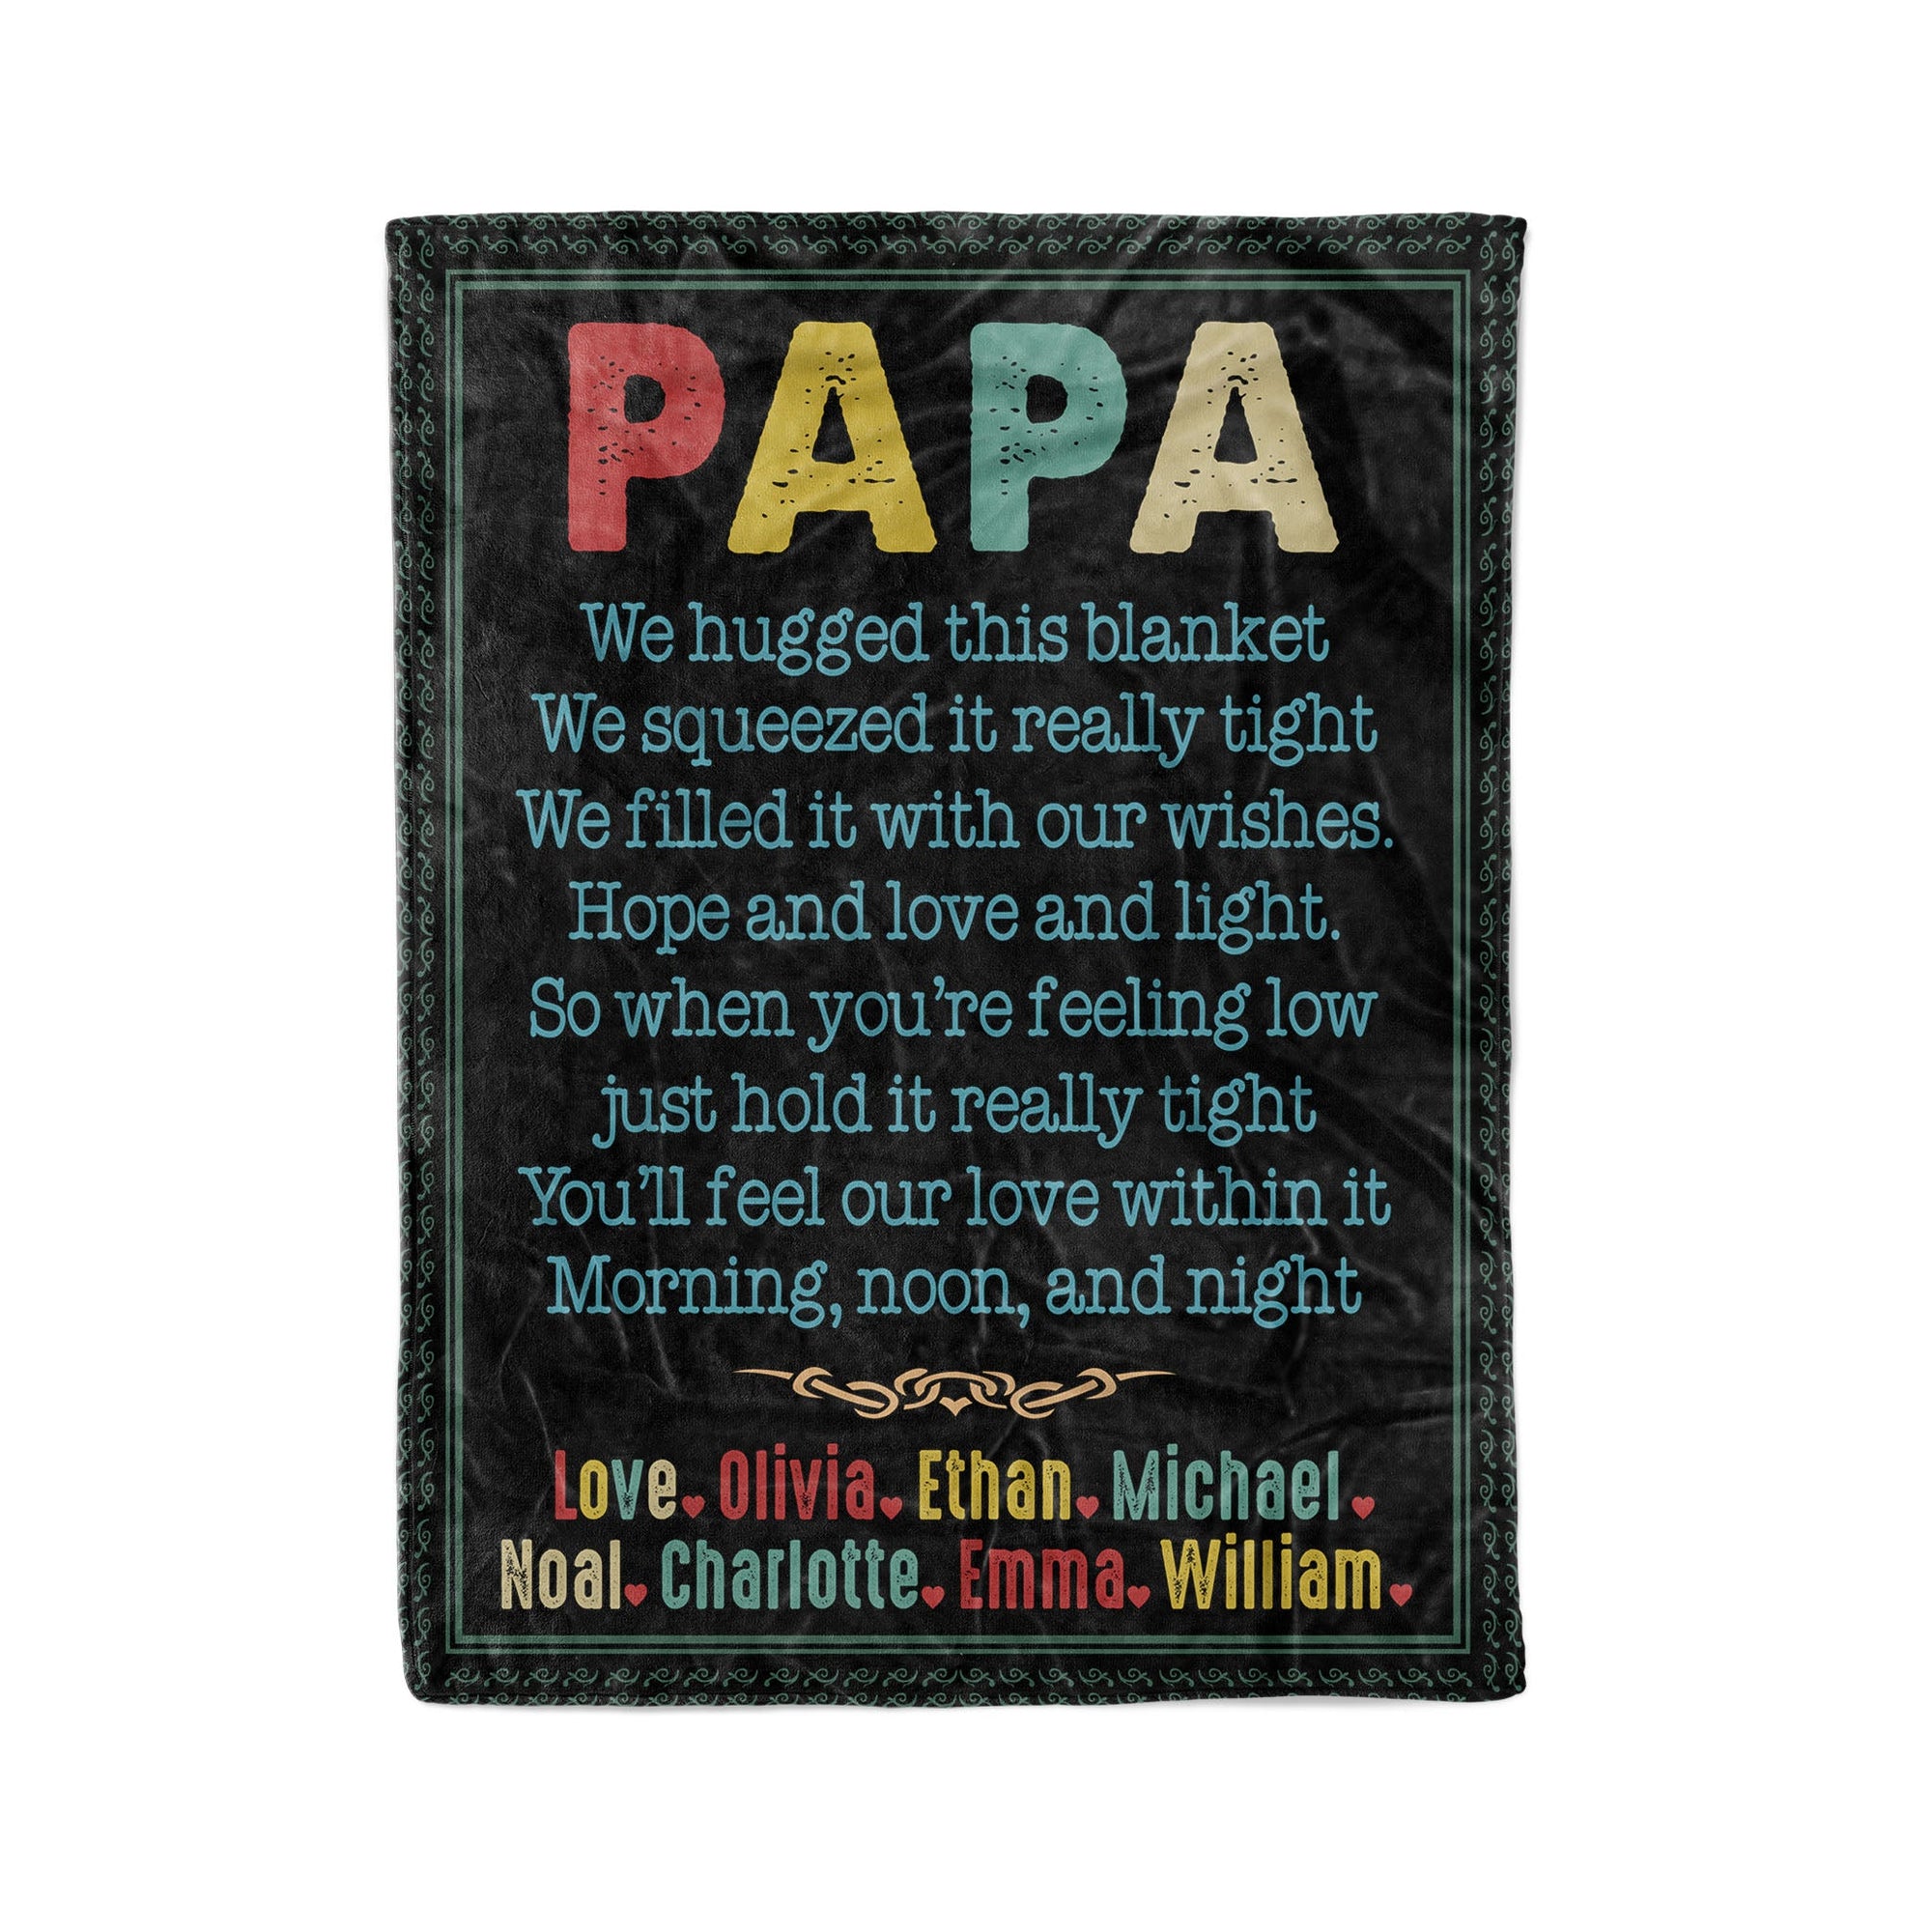 Personalized Blanket For Papa gift ideas for Dad custom Name blanket